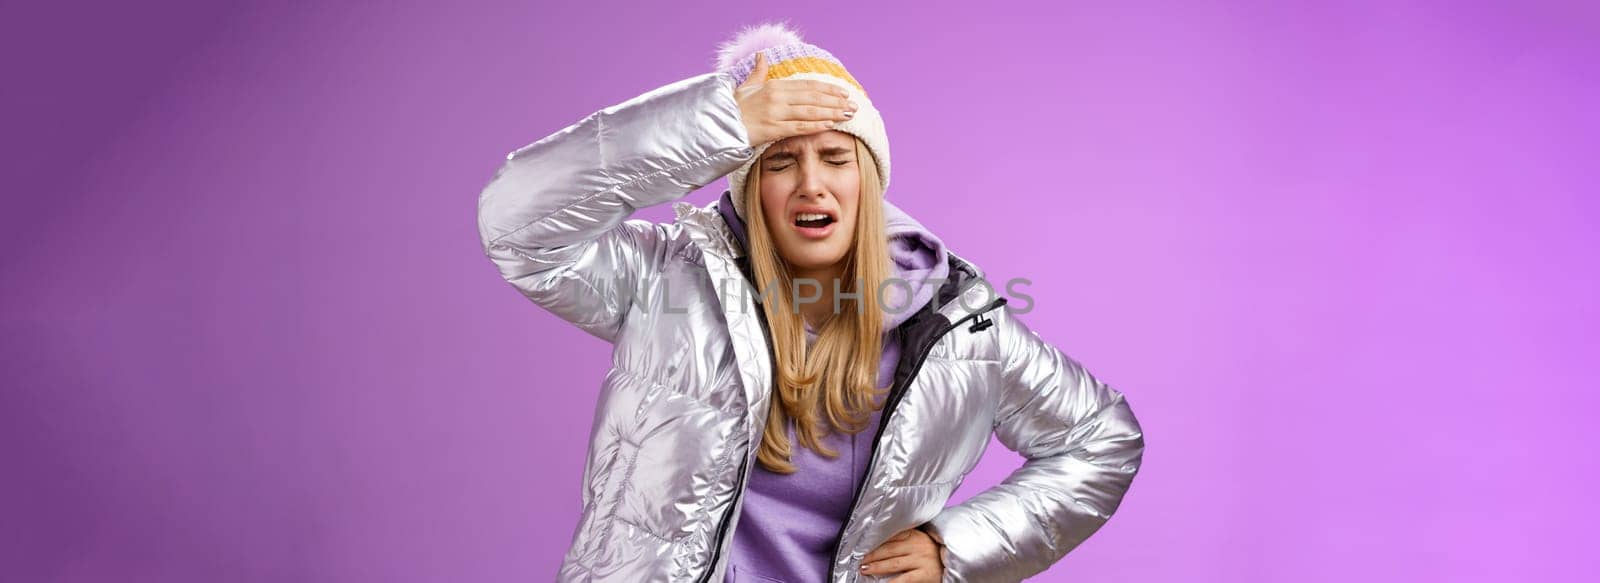 Girl sick tired touch forehead painful feeling grimacing complaining boyfriend shot snowball woman face standing bothered fed up and upset, whining displeased suffering headache, purple background by Benzoix